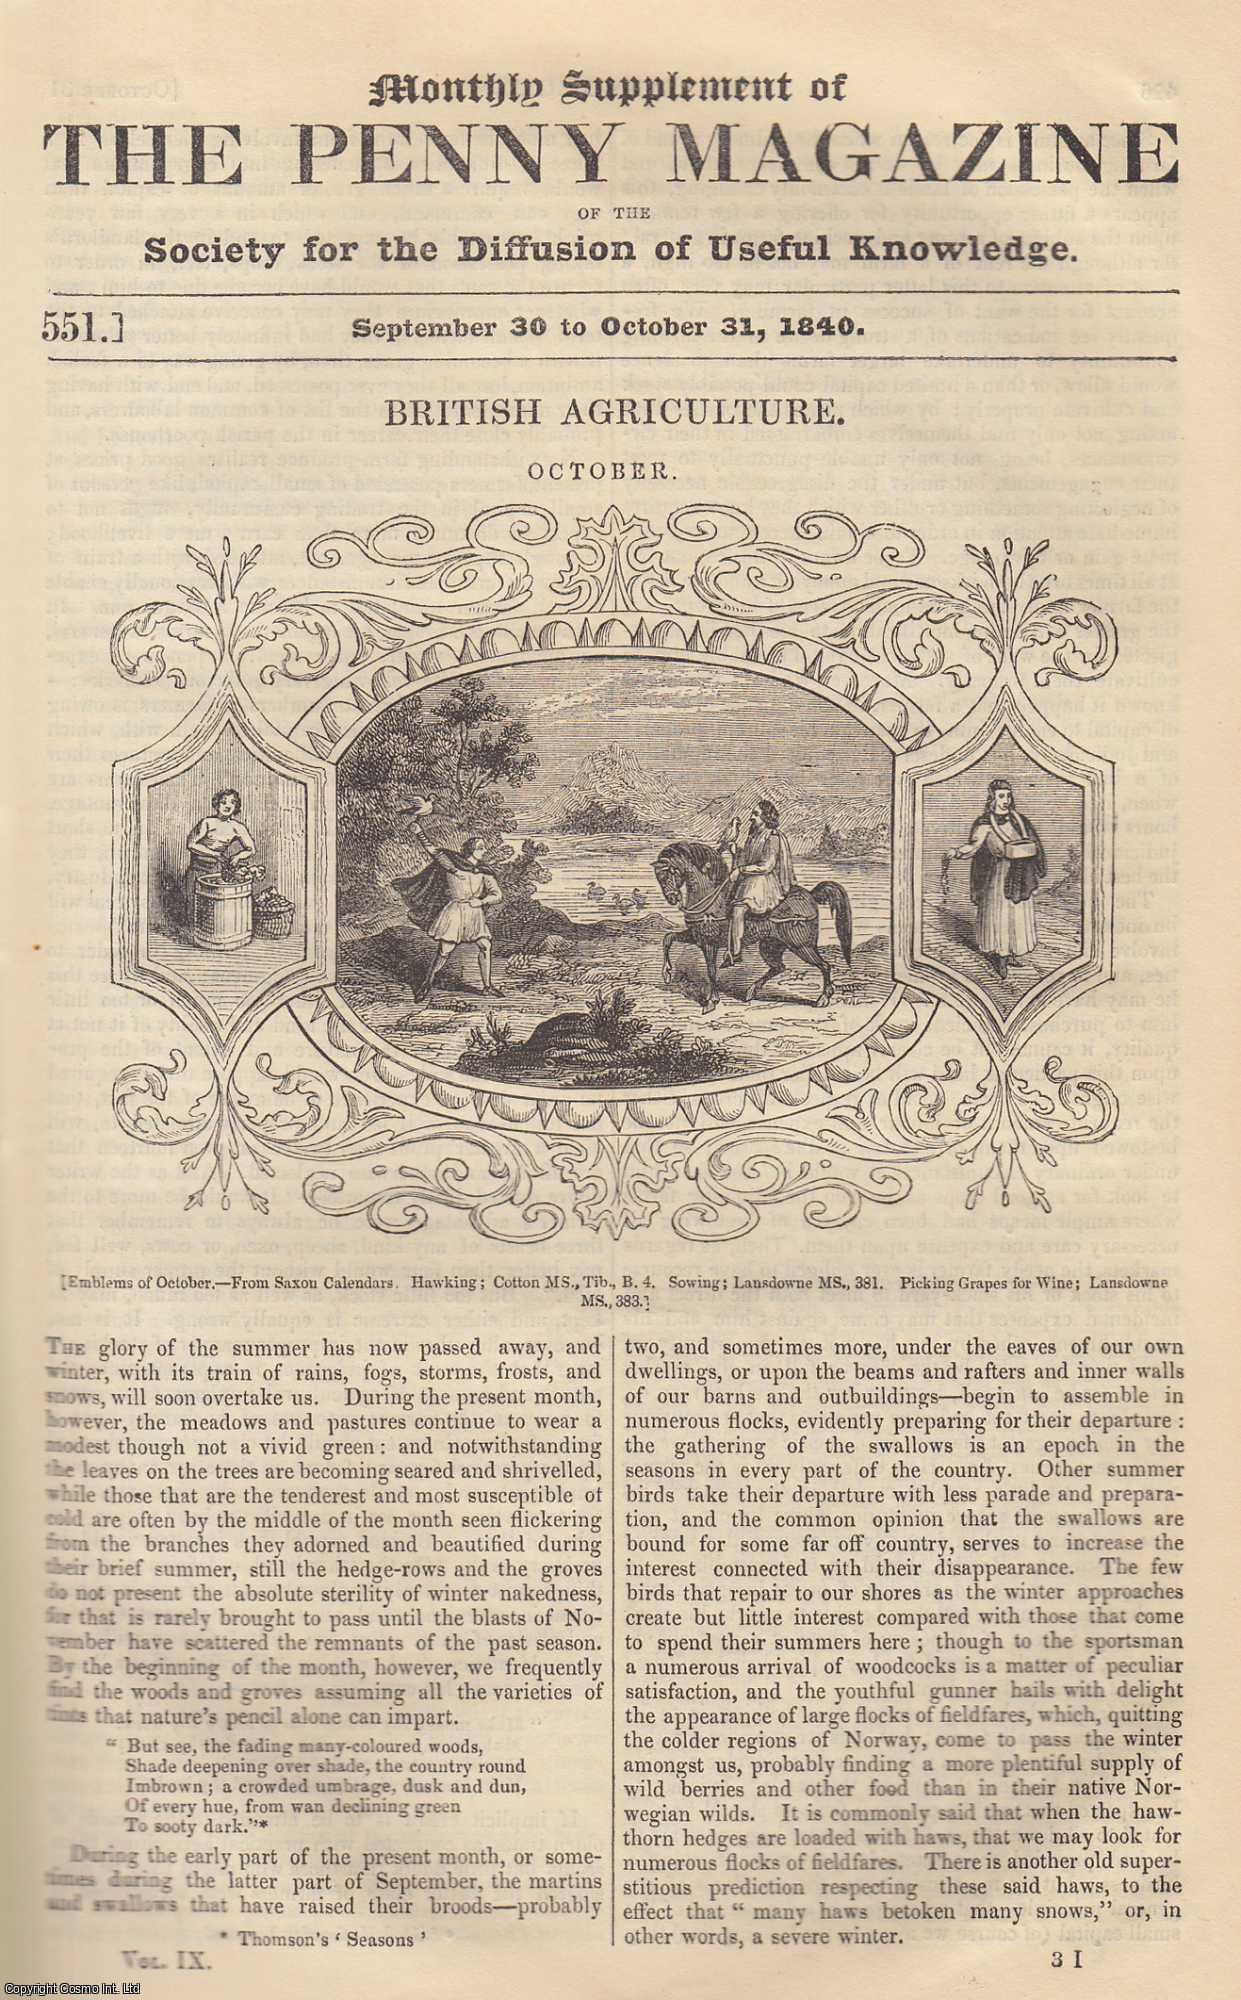 Penny Magazine - British Agriculture in October. Issue No. 551, 1840. A complete original weekly issue of the Penny Magazine, 1840.